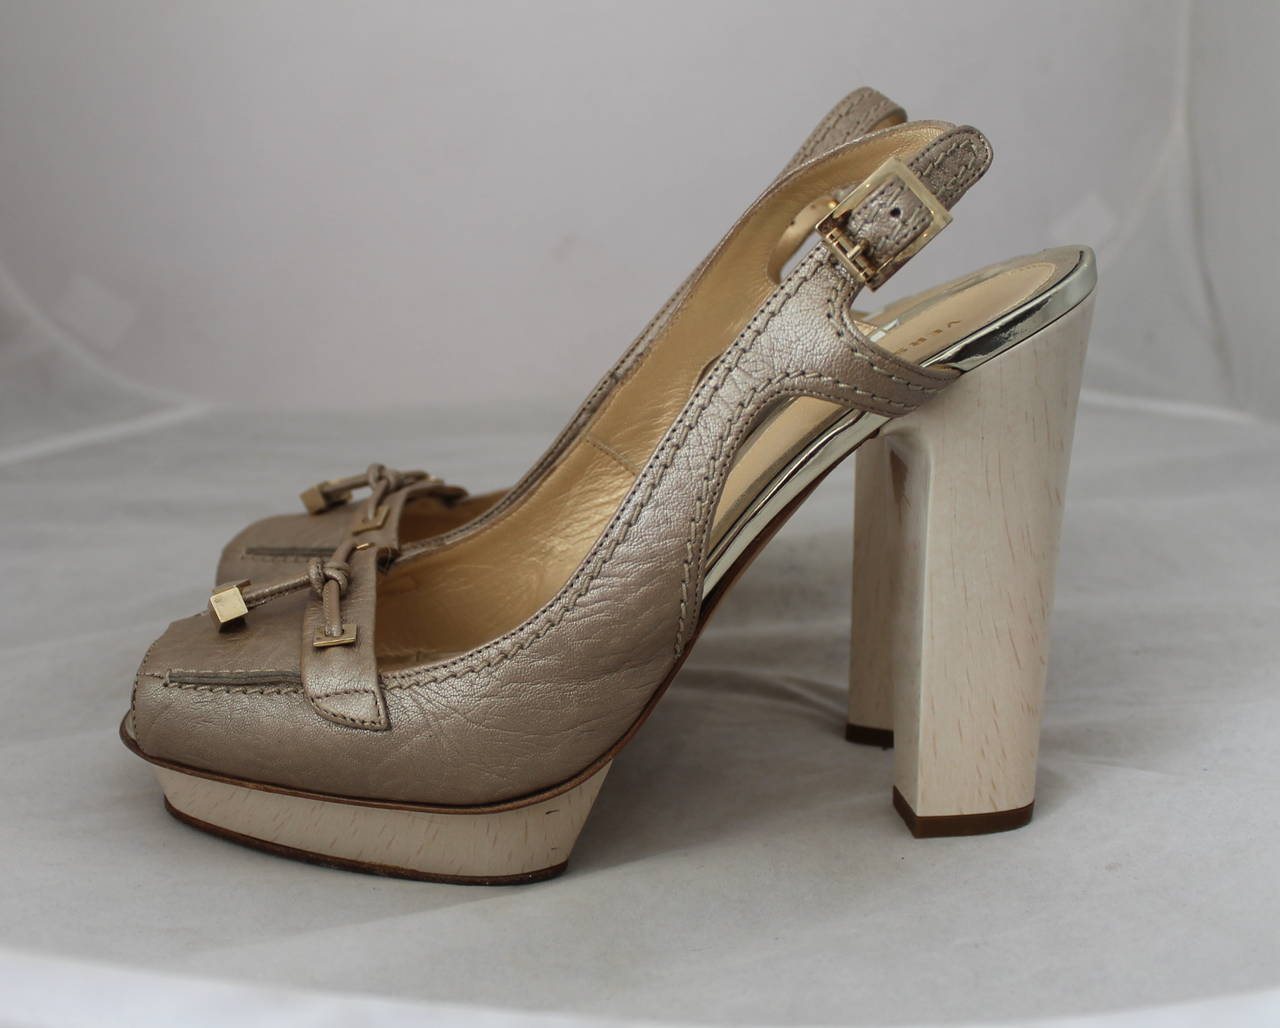 Versace Metallic Tan Peep-toe Platform Heels - 40. These shoes are in fair condition with wear on the bottom and on the sole. There is one black scratch on the bottom of the left shoes (image 3) but cannot be seen unless closely inspected.